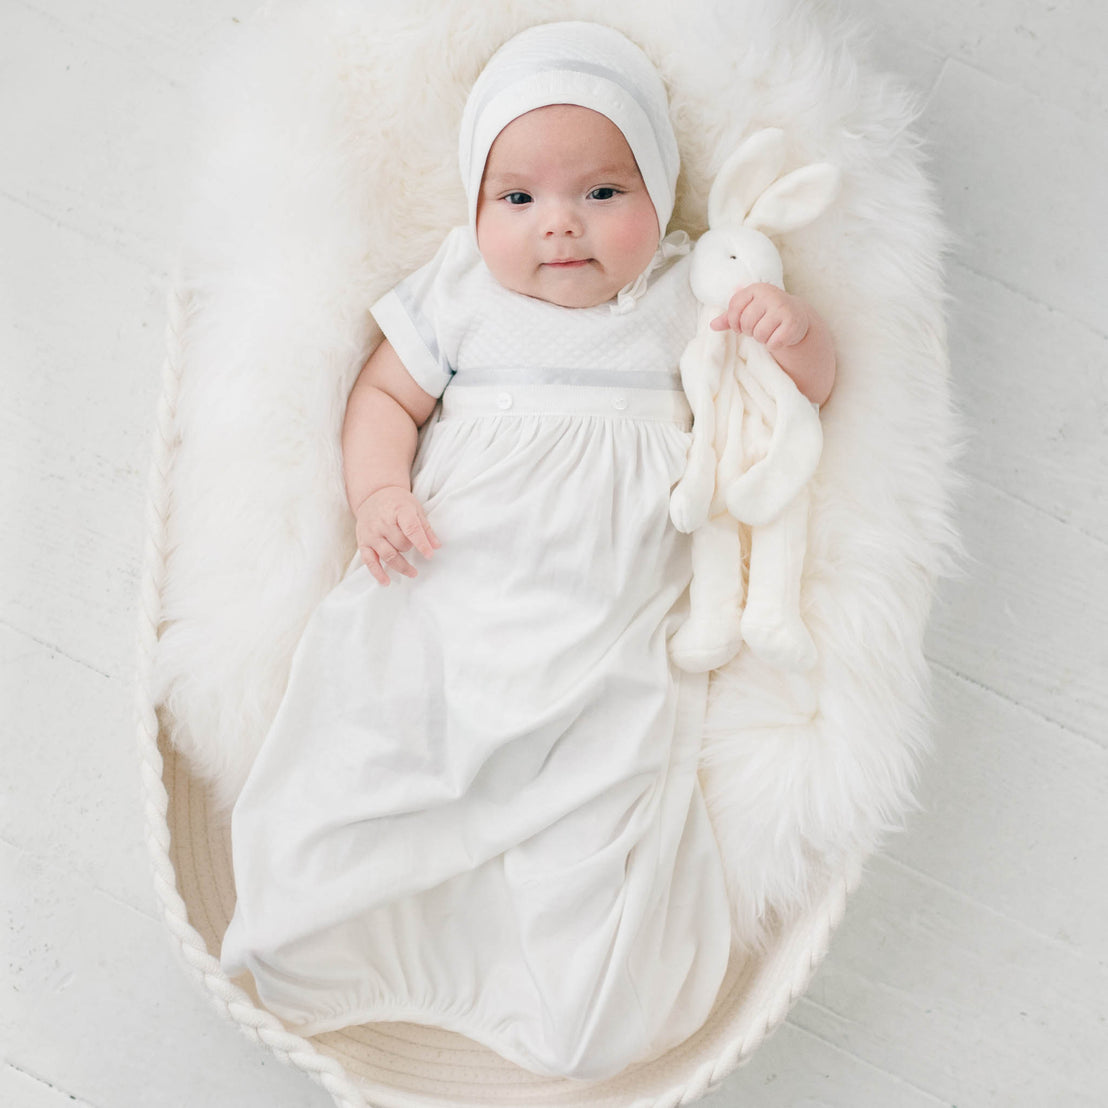 Newborn baby boy sitting in a white fur-lined crib. He is wearing the Owen Layette and Quilted Newborn Bonnet. He is also holding the Owen Silly Bunny Buddy